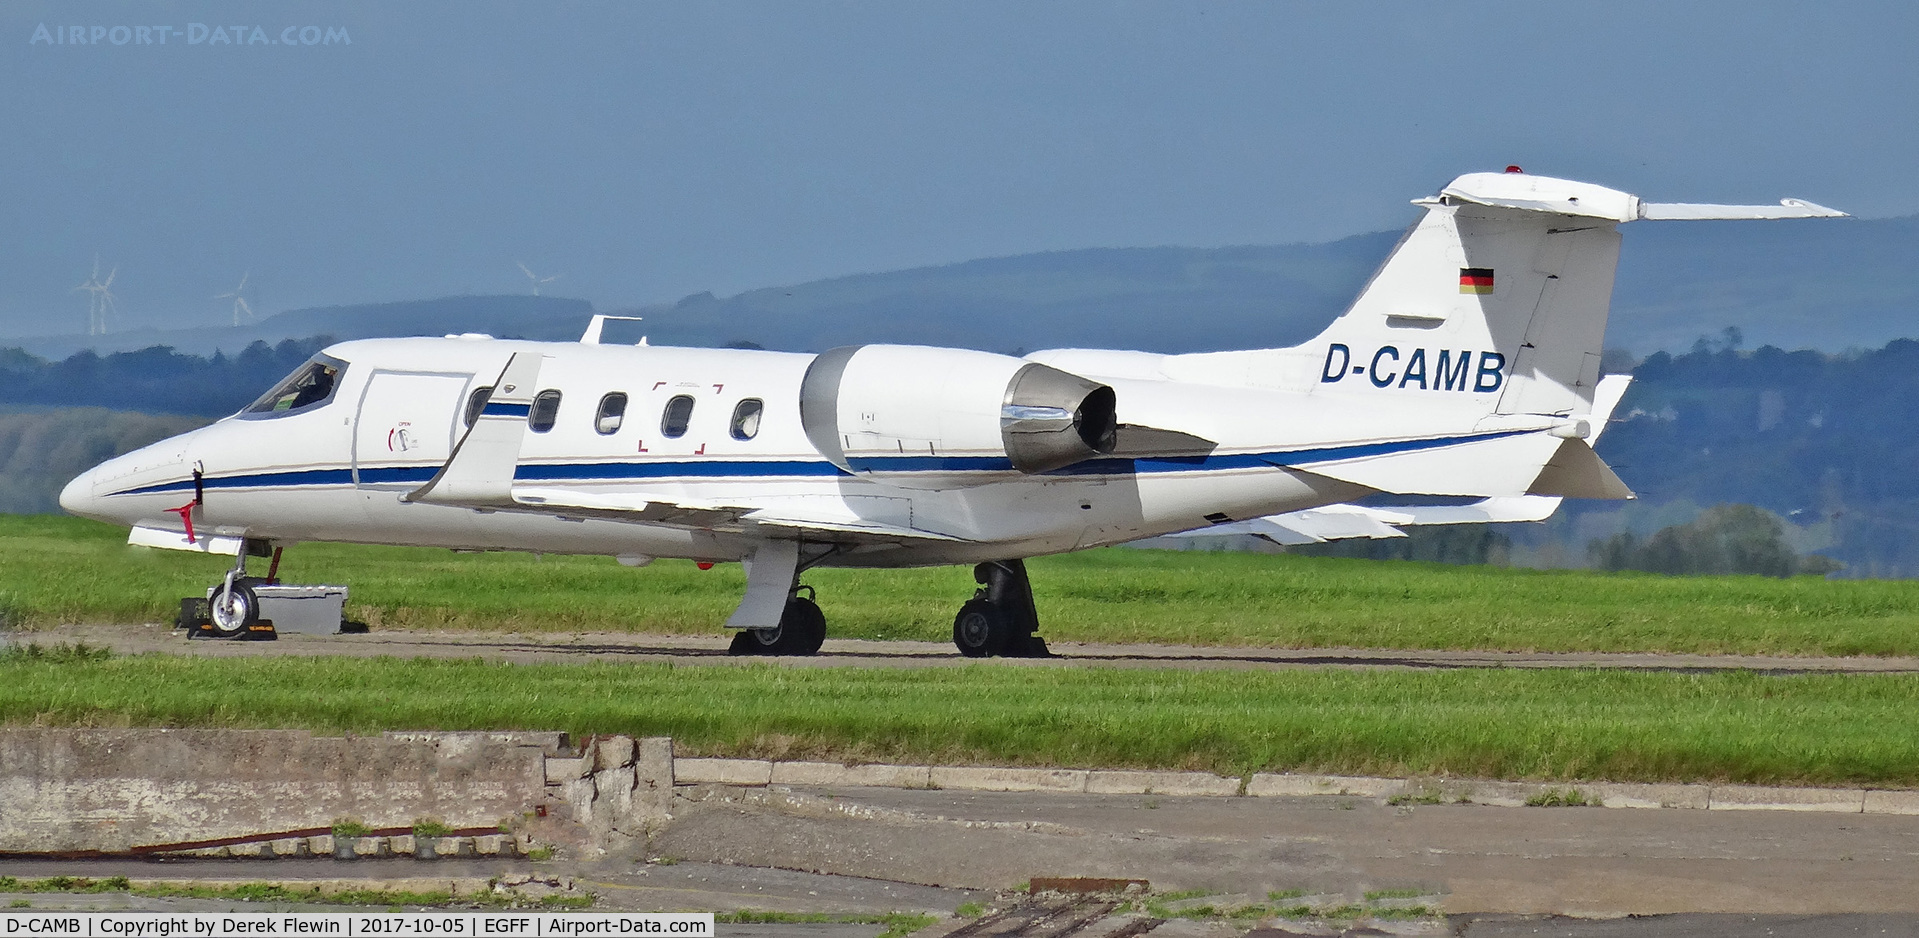 D-CAMB, 1978 Gates Learjet 35A C/N 35-174, Learjet 35A, seen parked up.